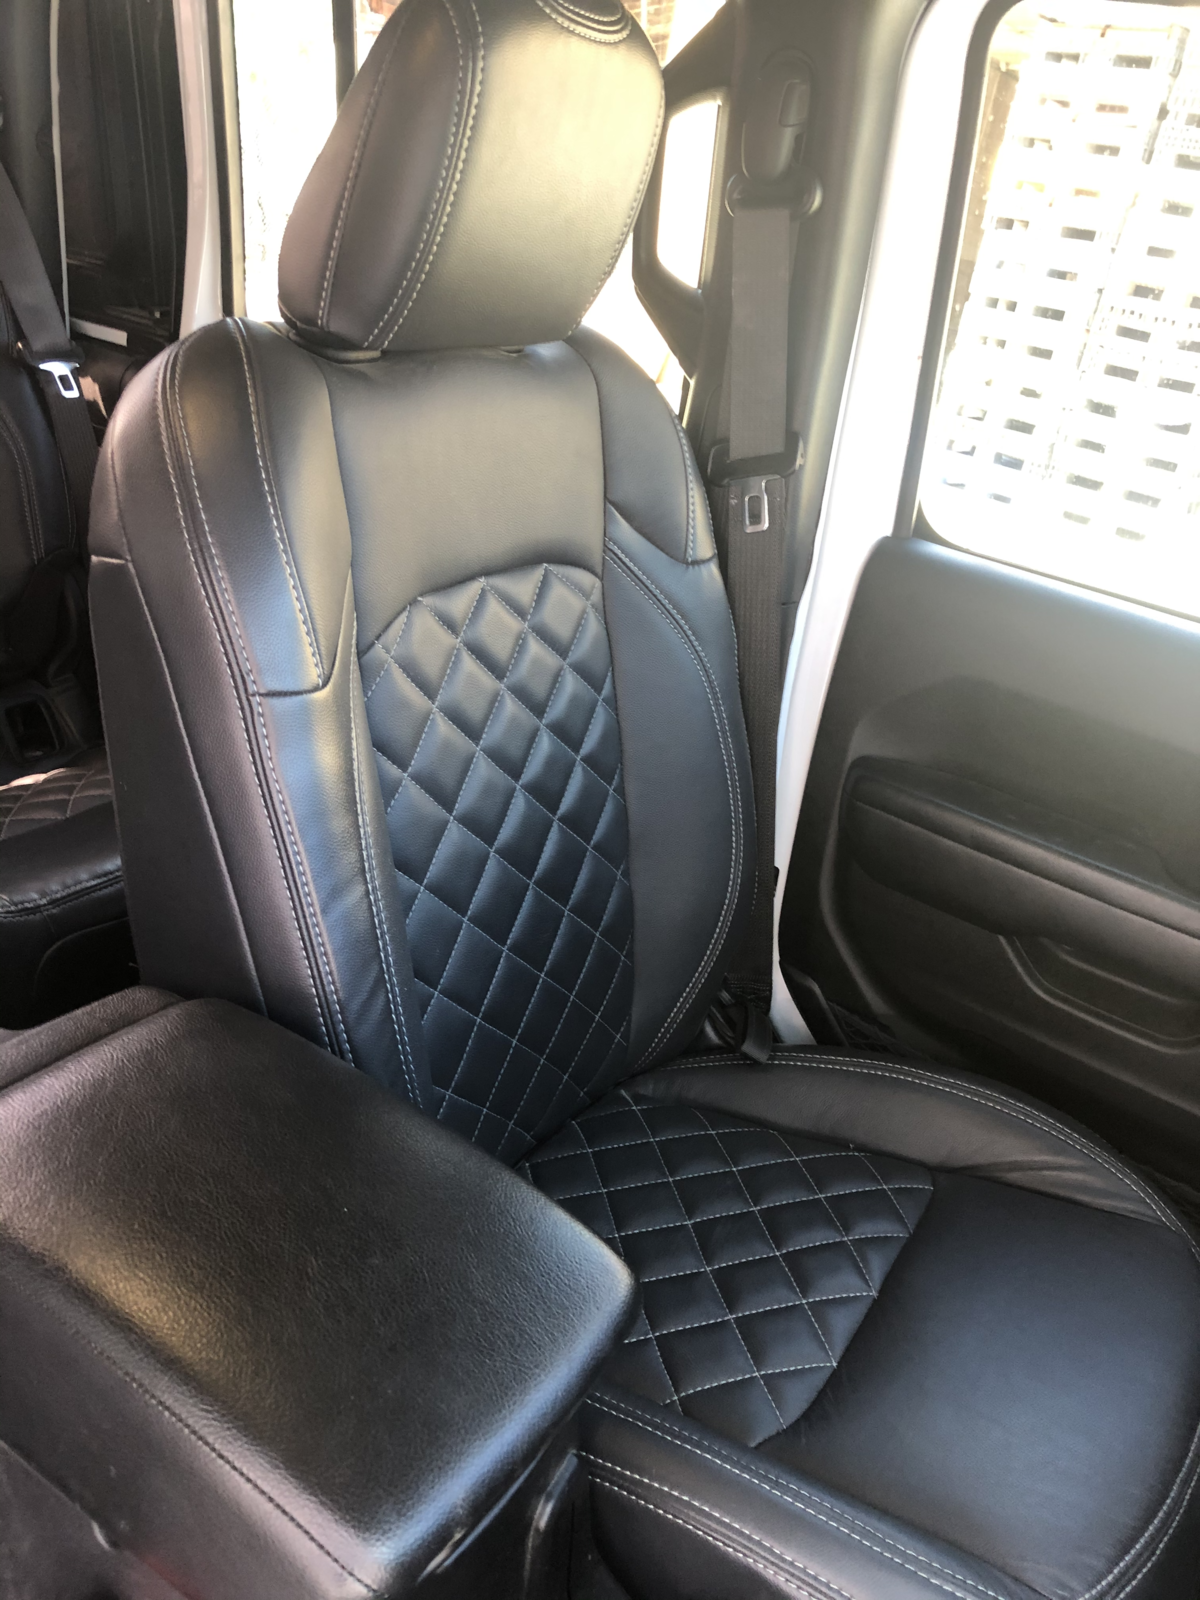 FOR SALE Road Wire Leather Seats + Installation 1,500. Local Michigan only Jeep Gladiator